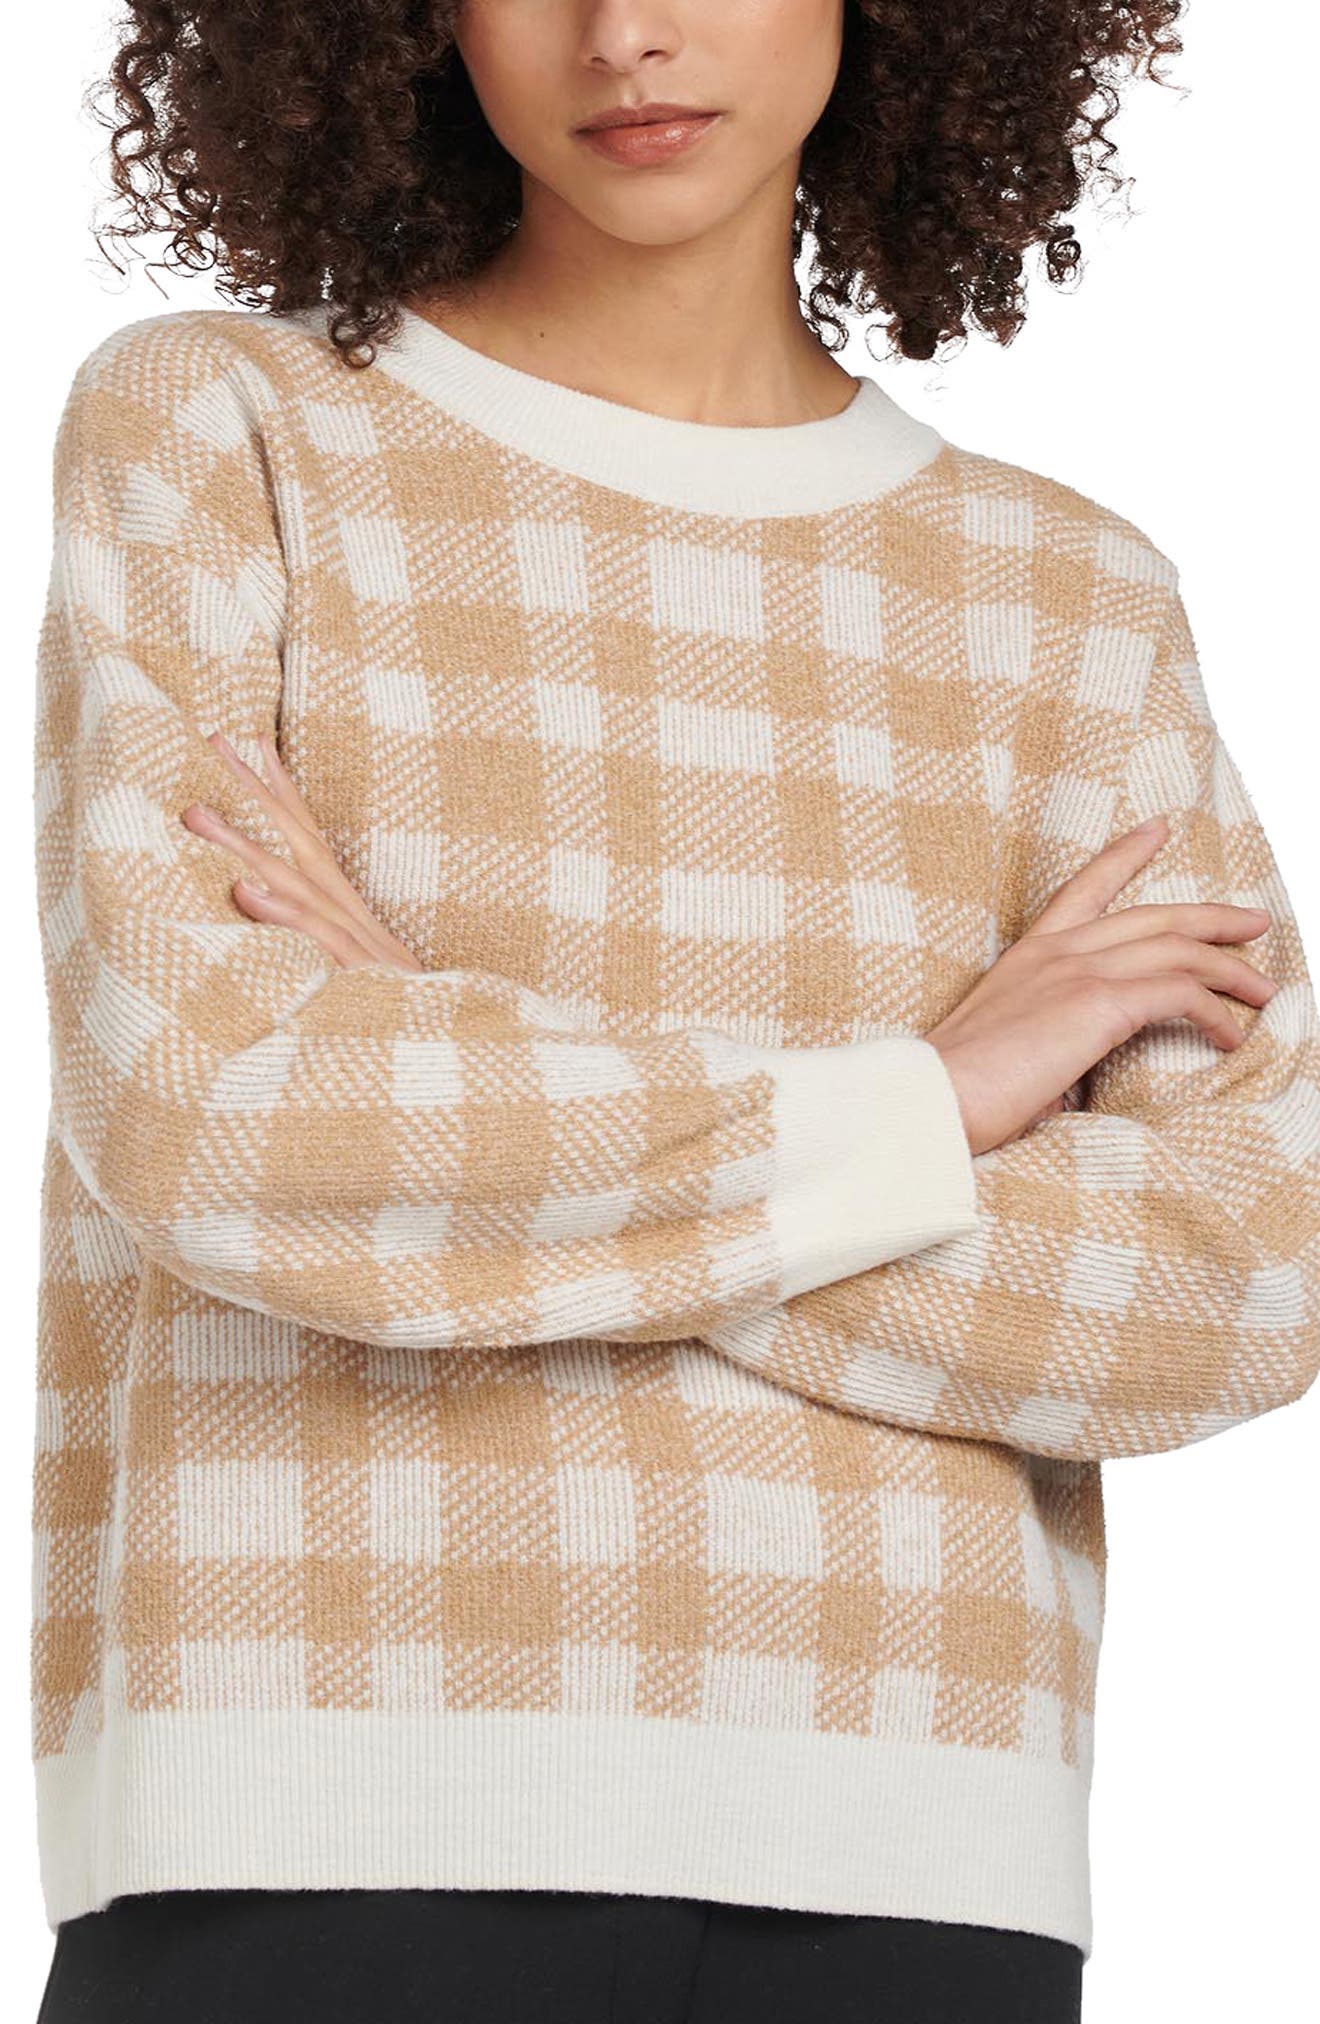 Barbour Rosevale Check Sweater in Hessian Check at Nordstrom